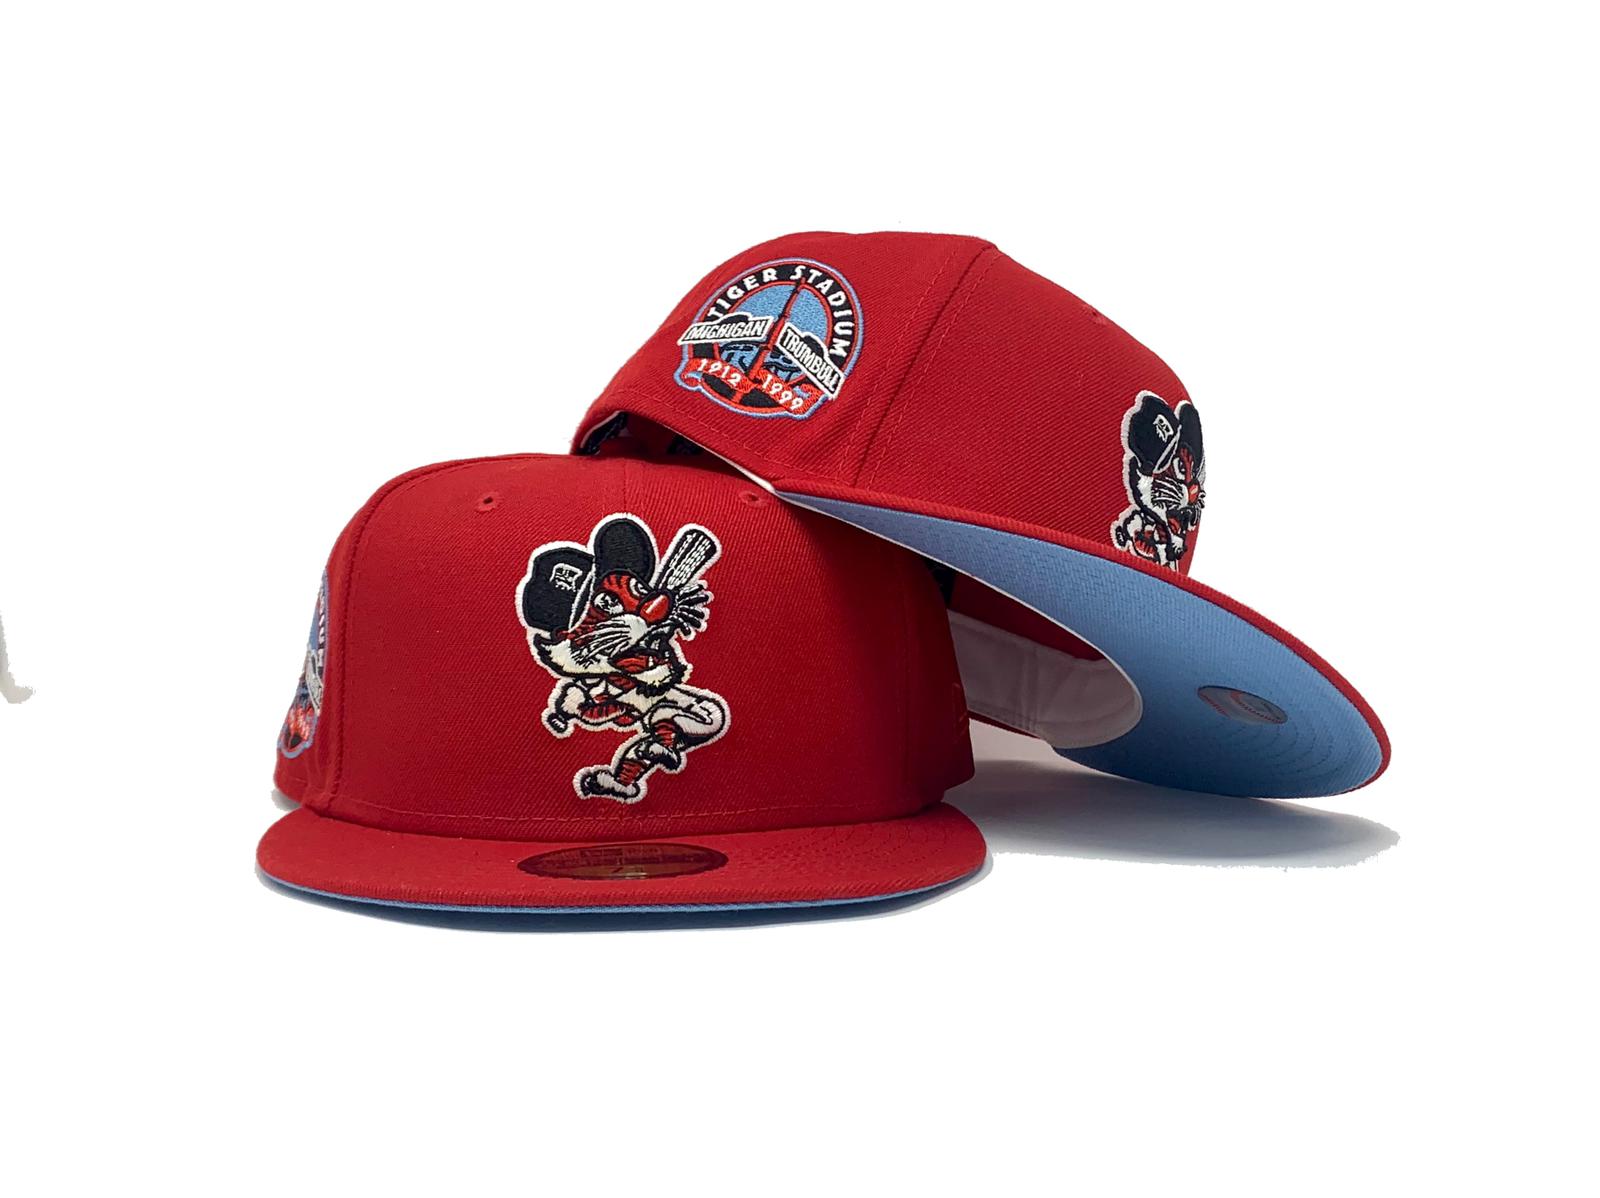 Detroit Tigers New Era Flagged 9FIFTY Red White & Blue Adjustable Hat